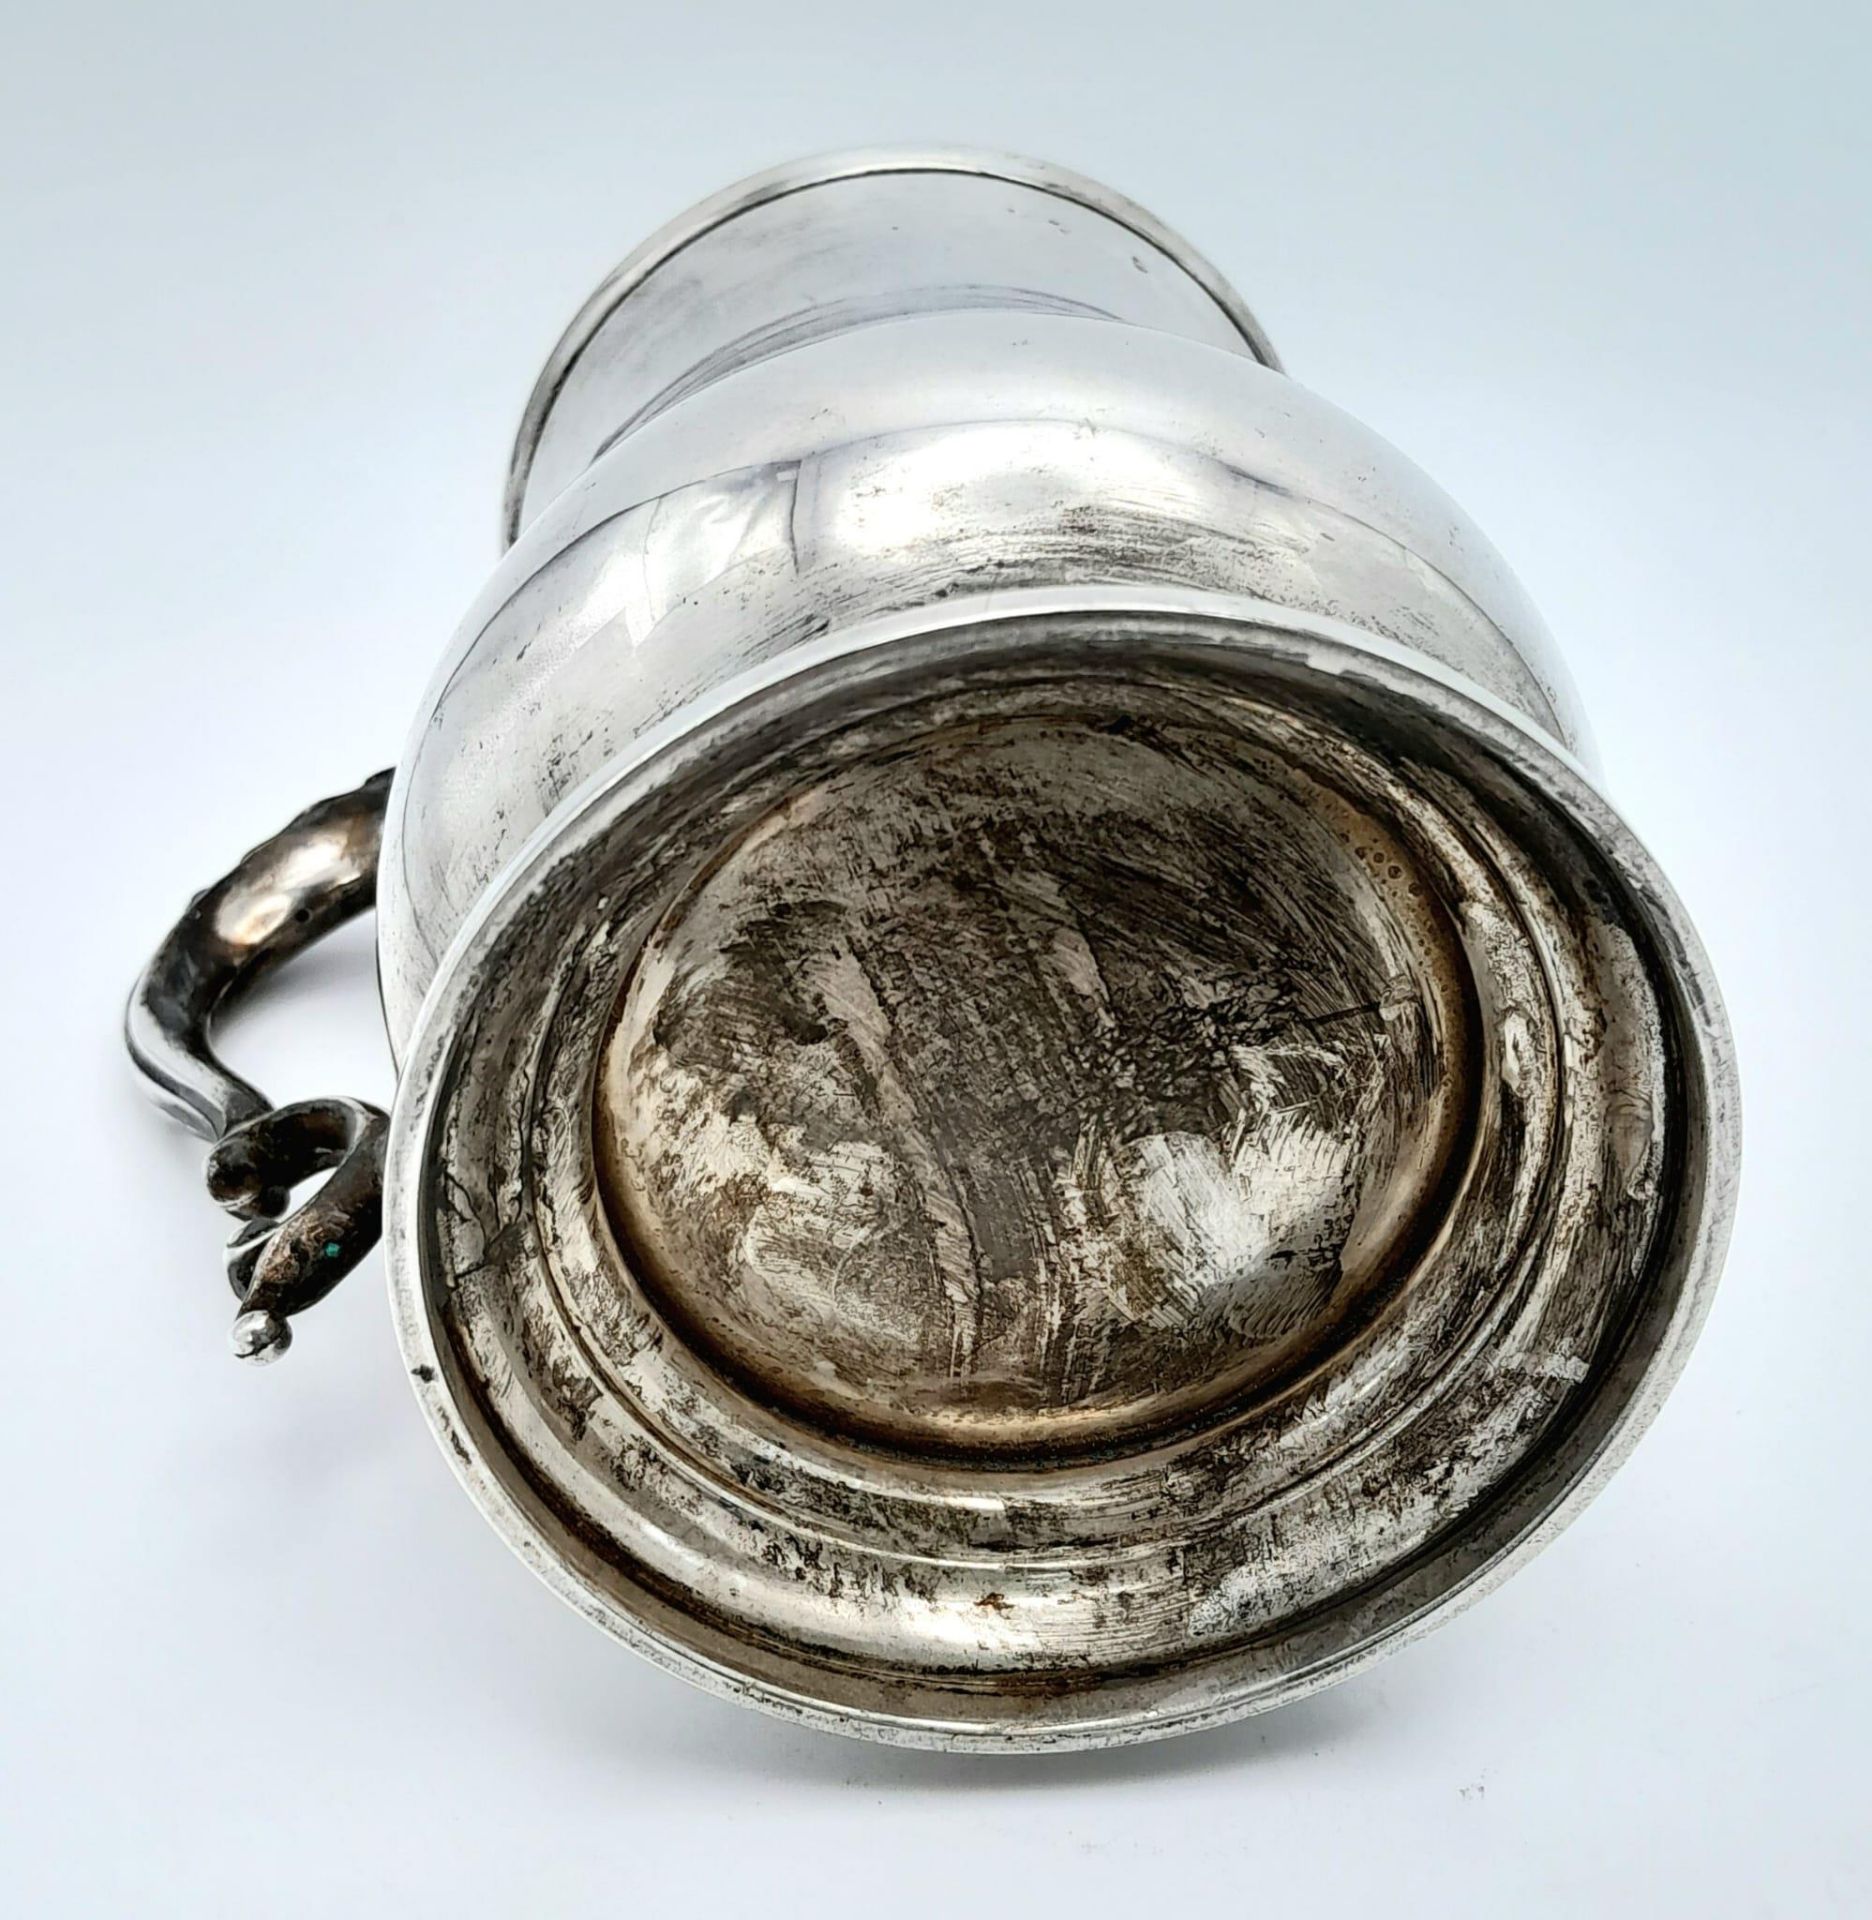 A Sterling Silver Tankard - Given to Gareth Smith of 'The Thrusters' - Winning regional darts team - Image 4 of 7